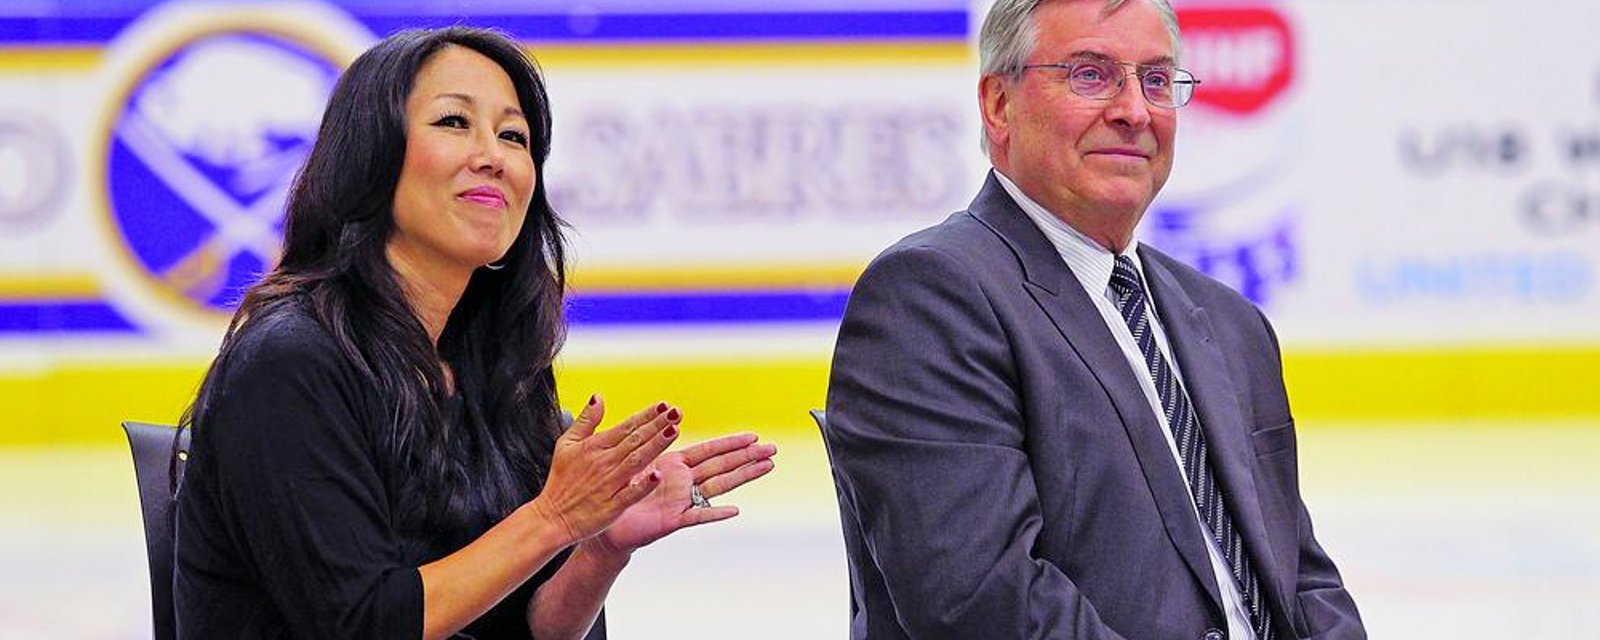 Sabres owners Kim and Terry Pegula cheap out, announce coaching staff for 2021-22